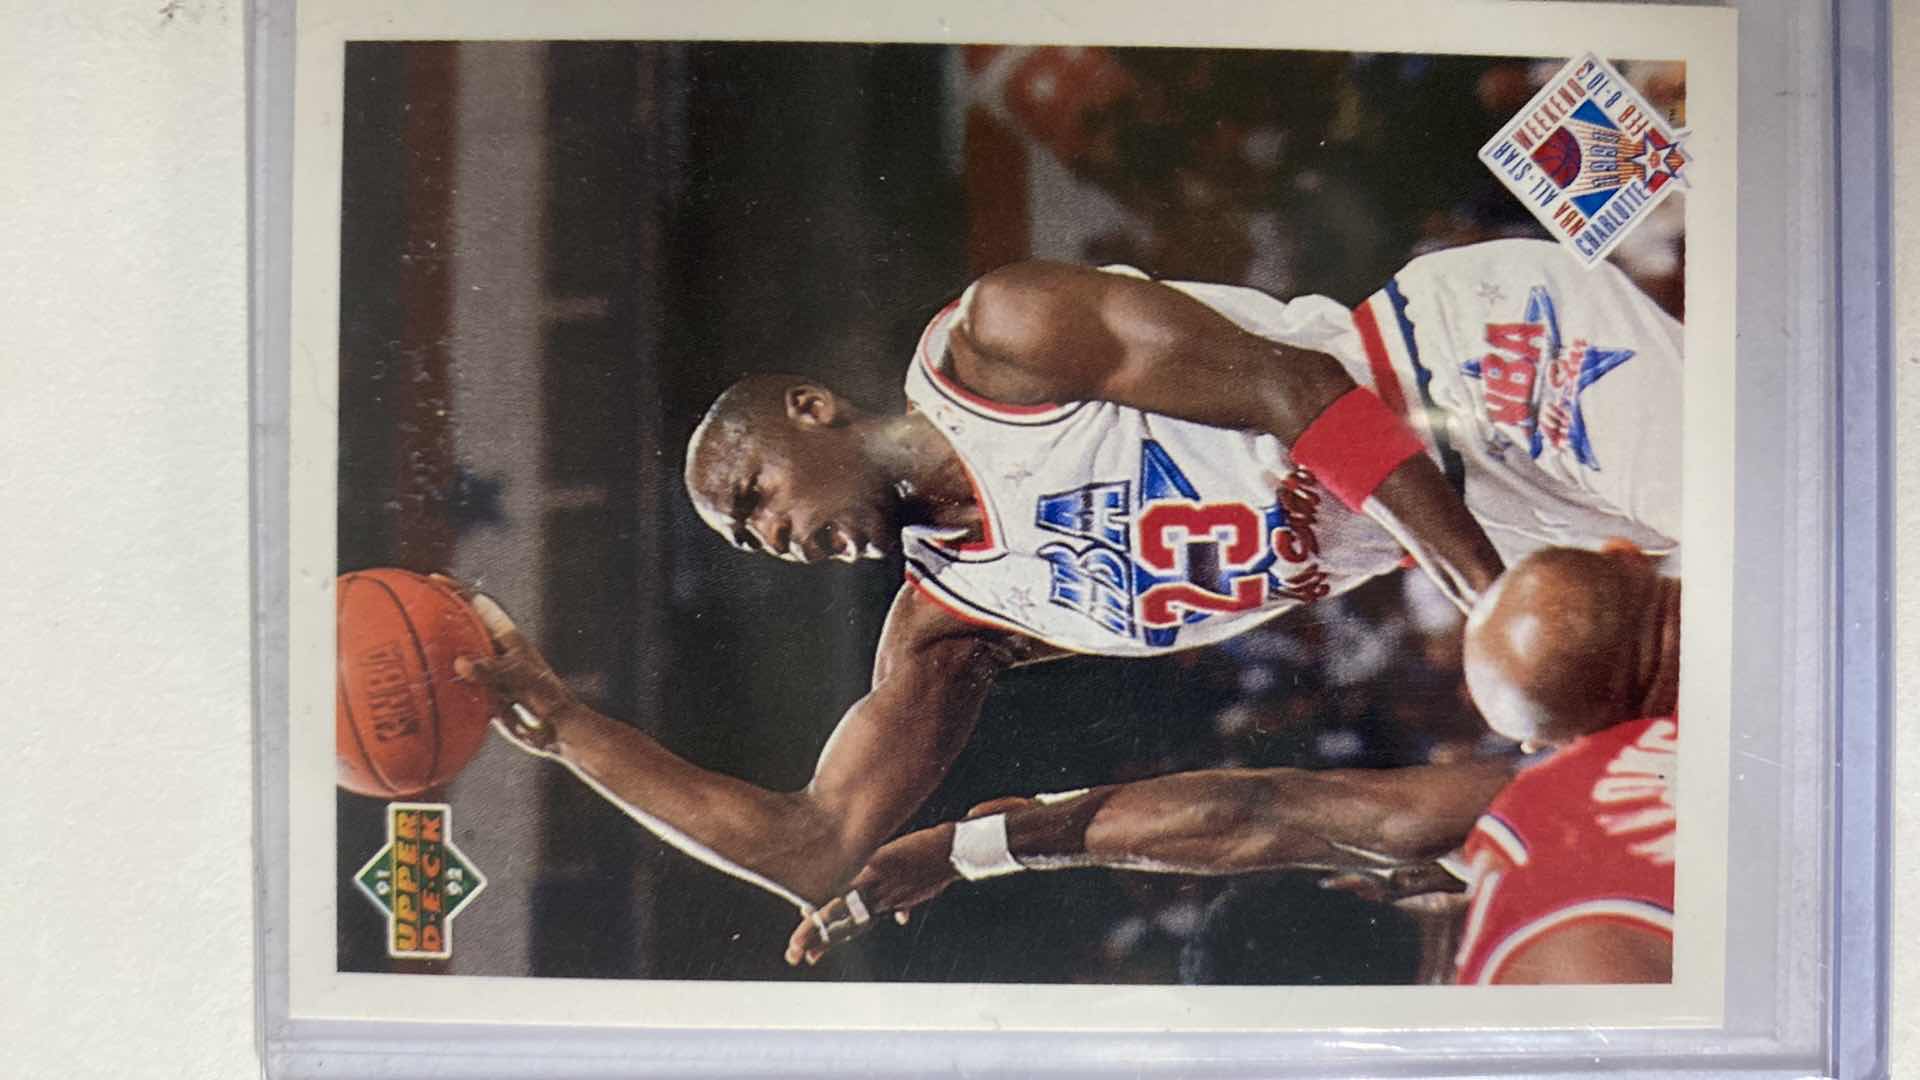 Photo 7 of 6 COLLECTIBLE BASKETBALL CARDS - 5 ARE MICHAEL JORDAN